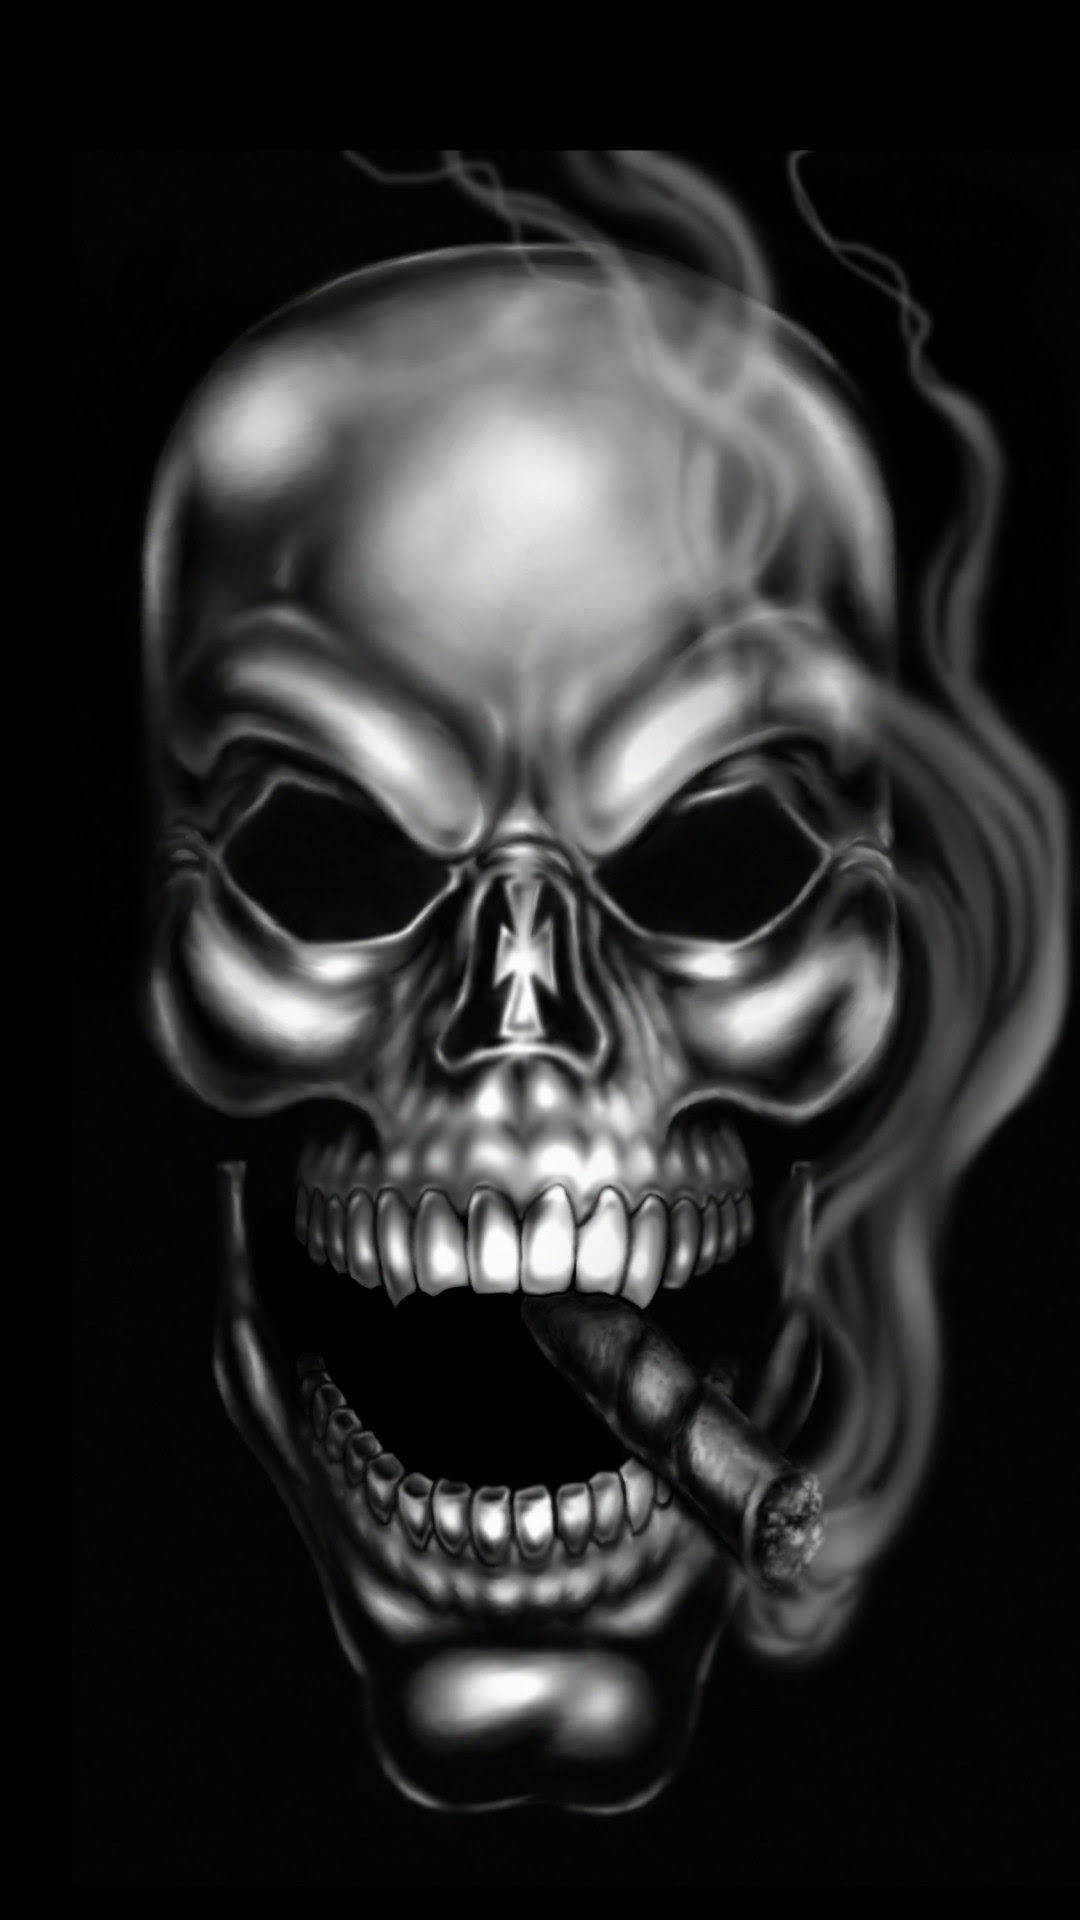 Skull Wallpapers For Mobile 52 Images